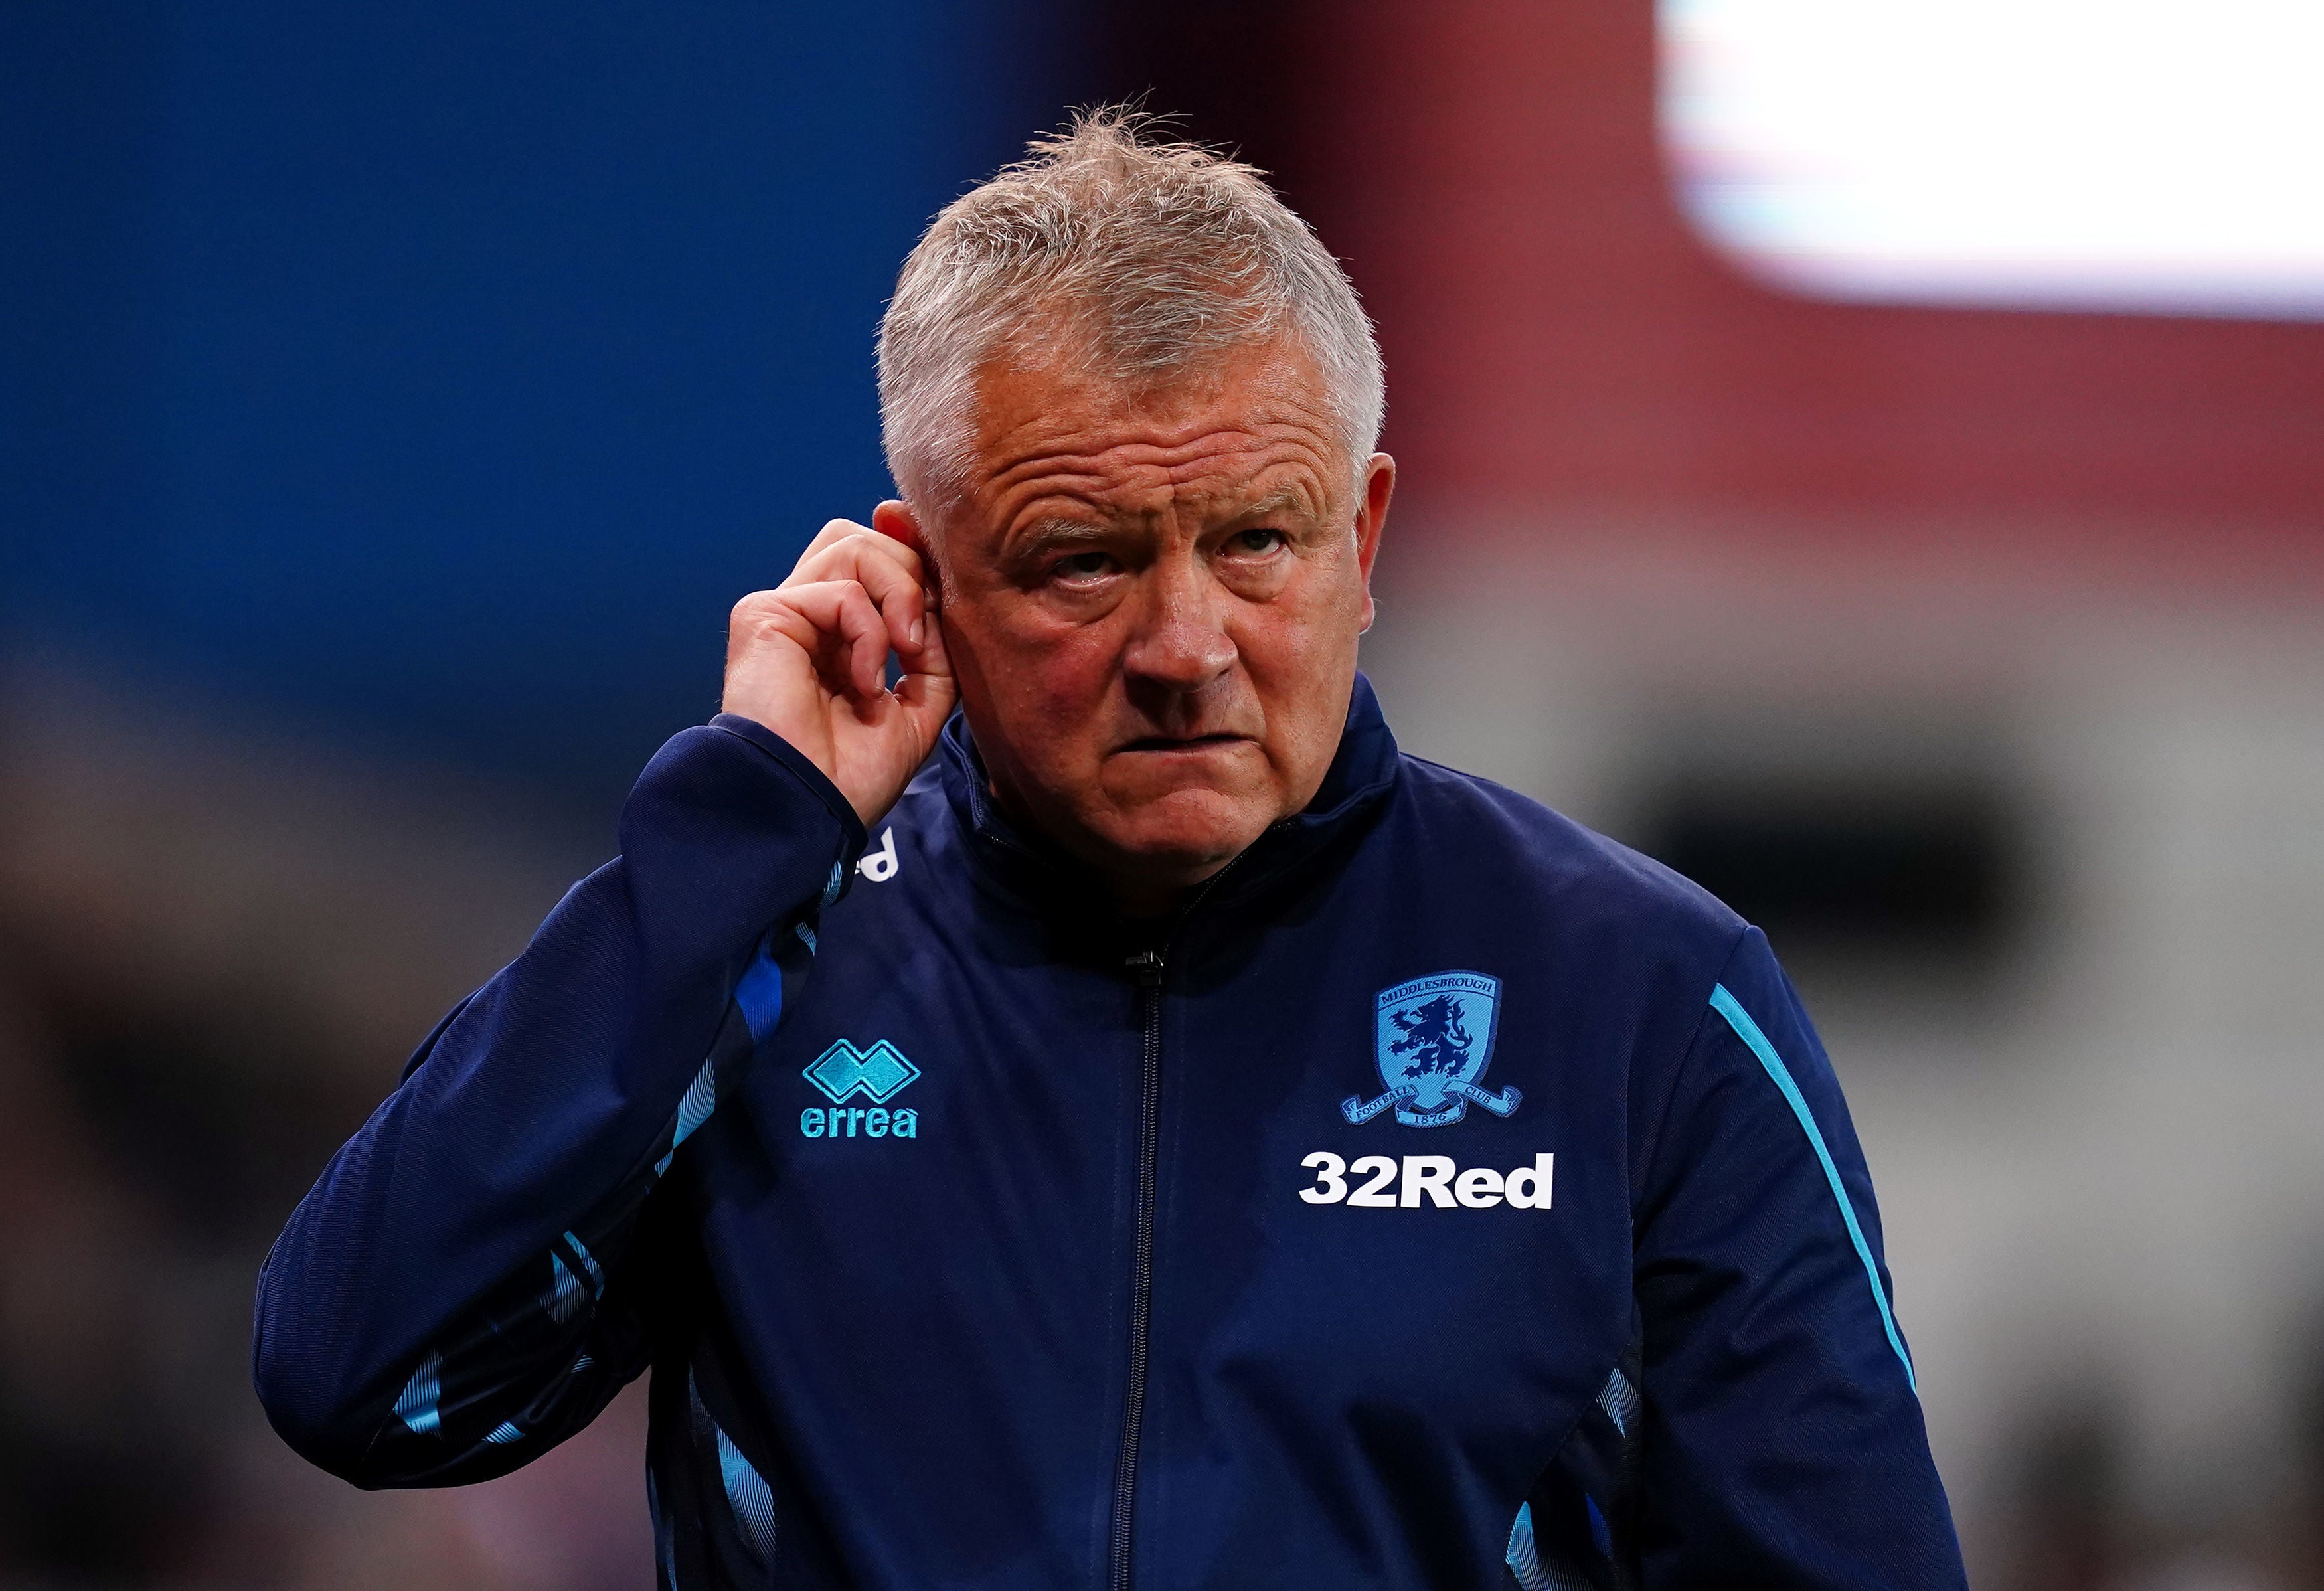 Chris Wilder has been sacked following Middlesbrough’s poor start to the campaign